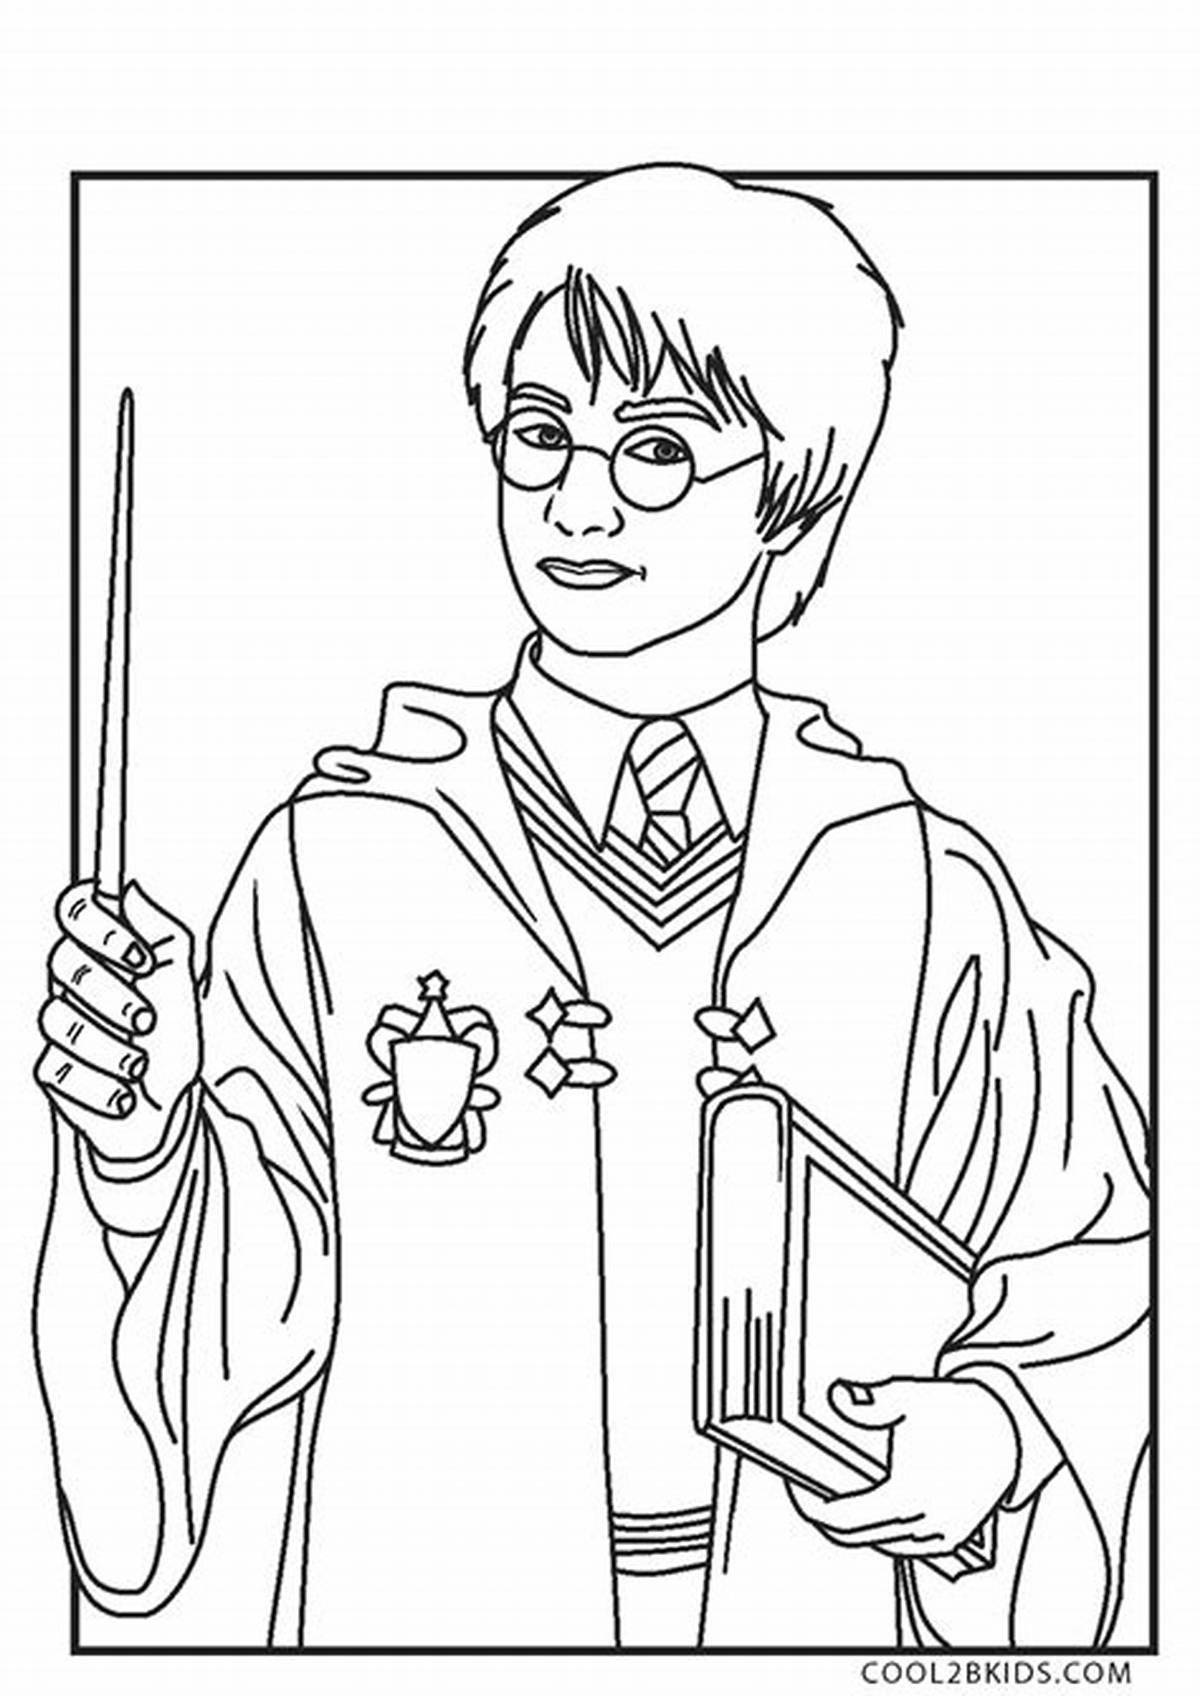 Impressive School of Witchcraft and Wizardry coloring book for Harry Potter fans